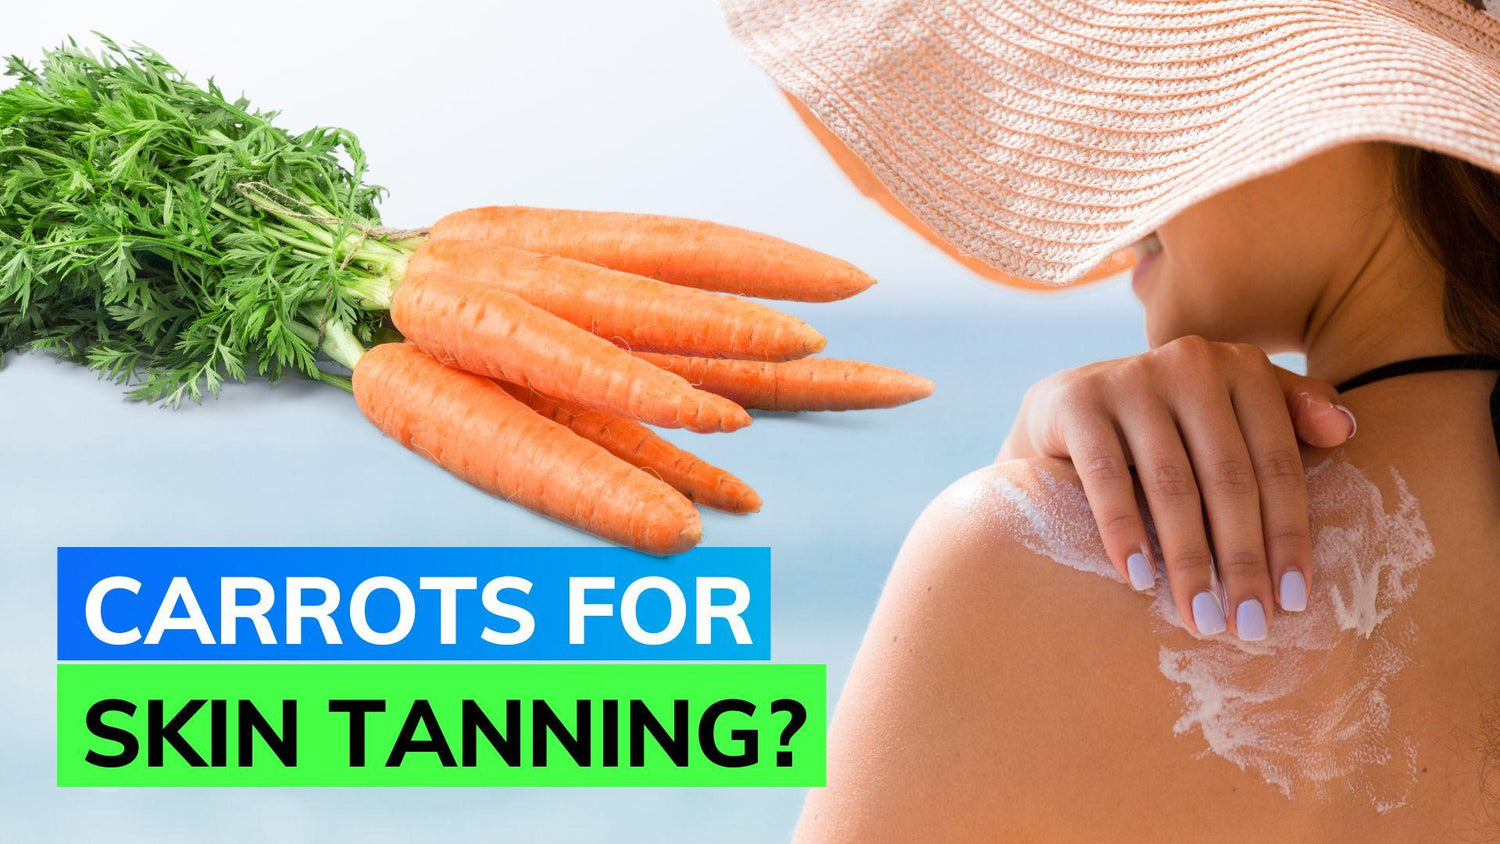 Why are carrots good for tanning?